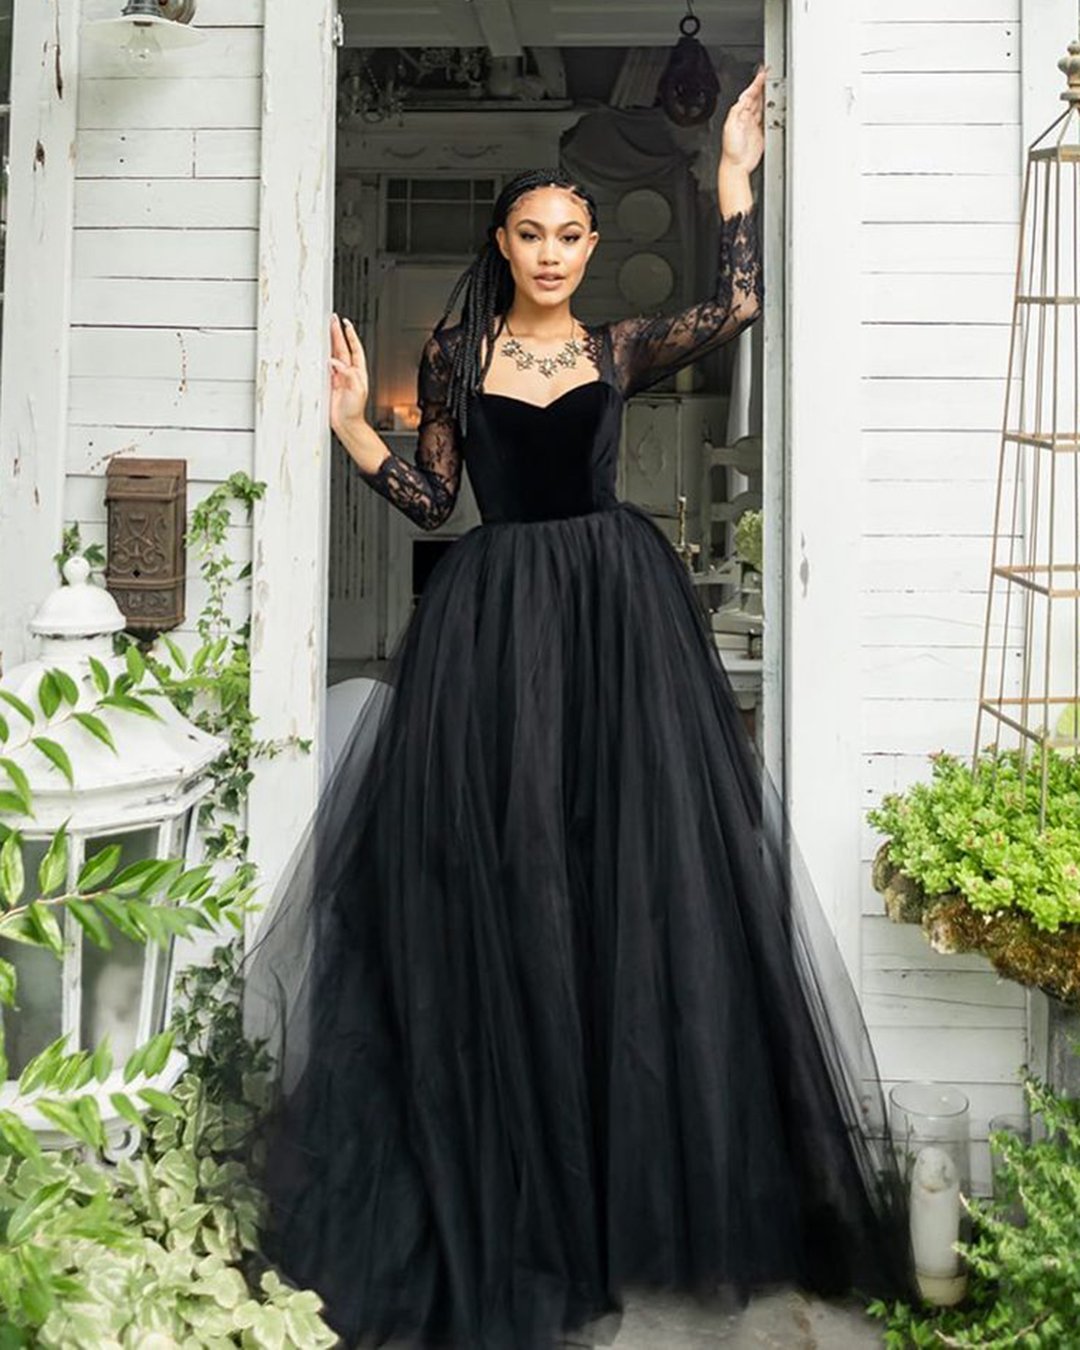 engagement gowns Floor length black prom dress with long sleeves,wedding reception gown,African women wedding dress,black bridal dress